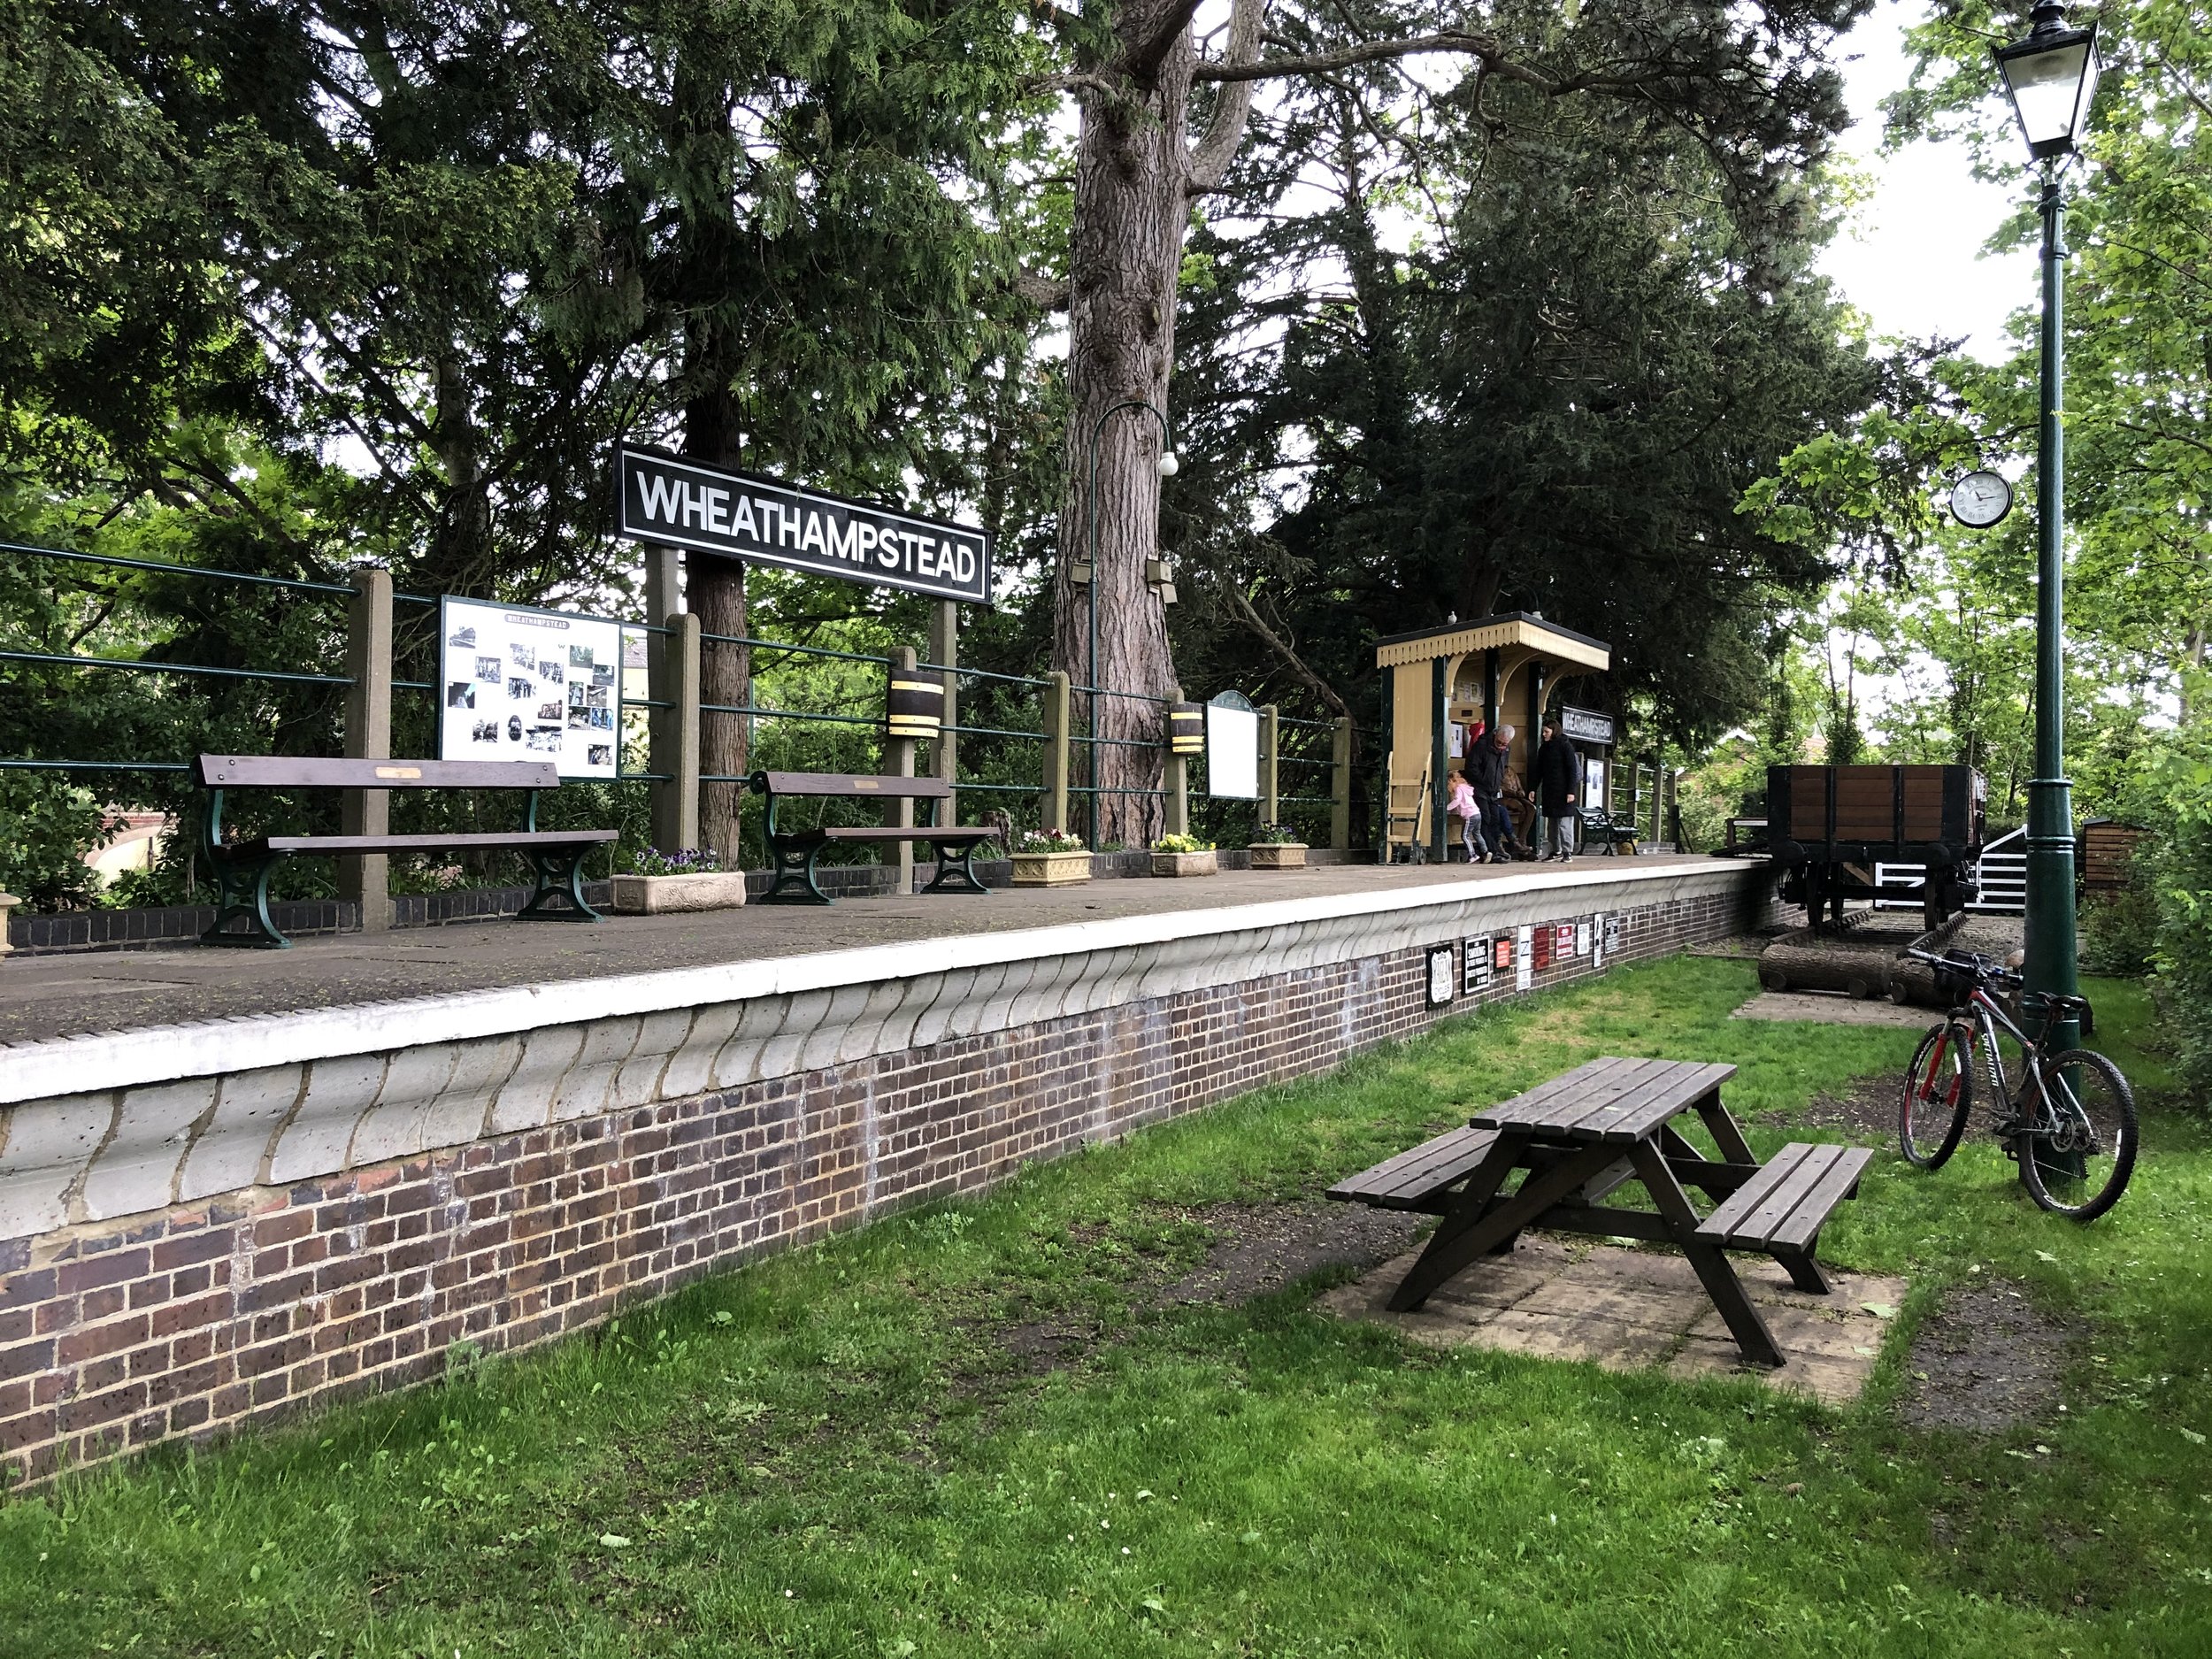 The Nickey Line, Ayot Greenway and The Alban Way